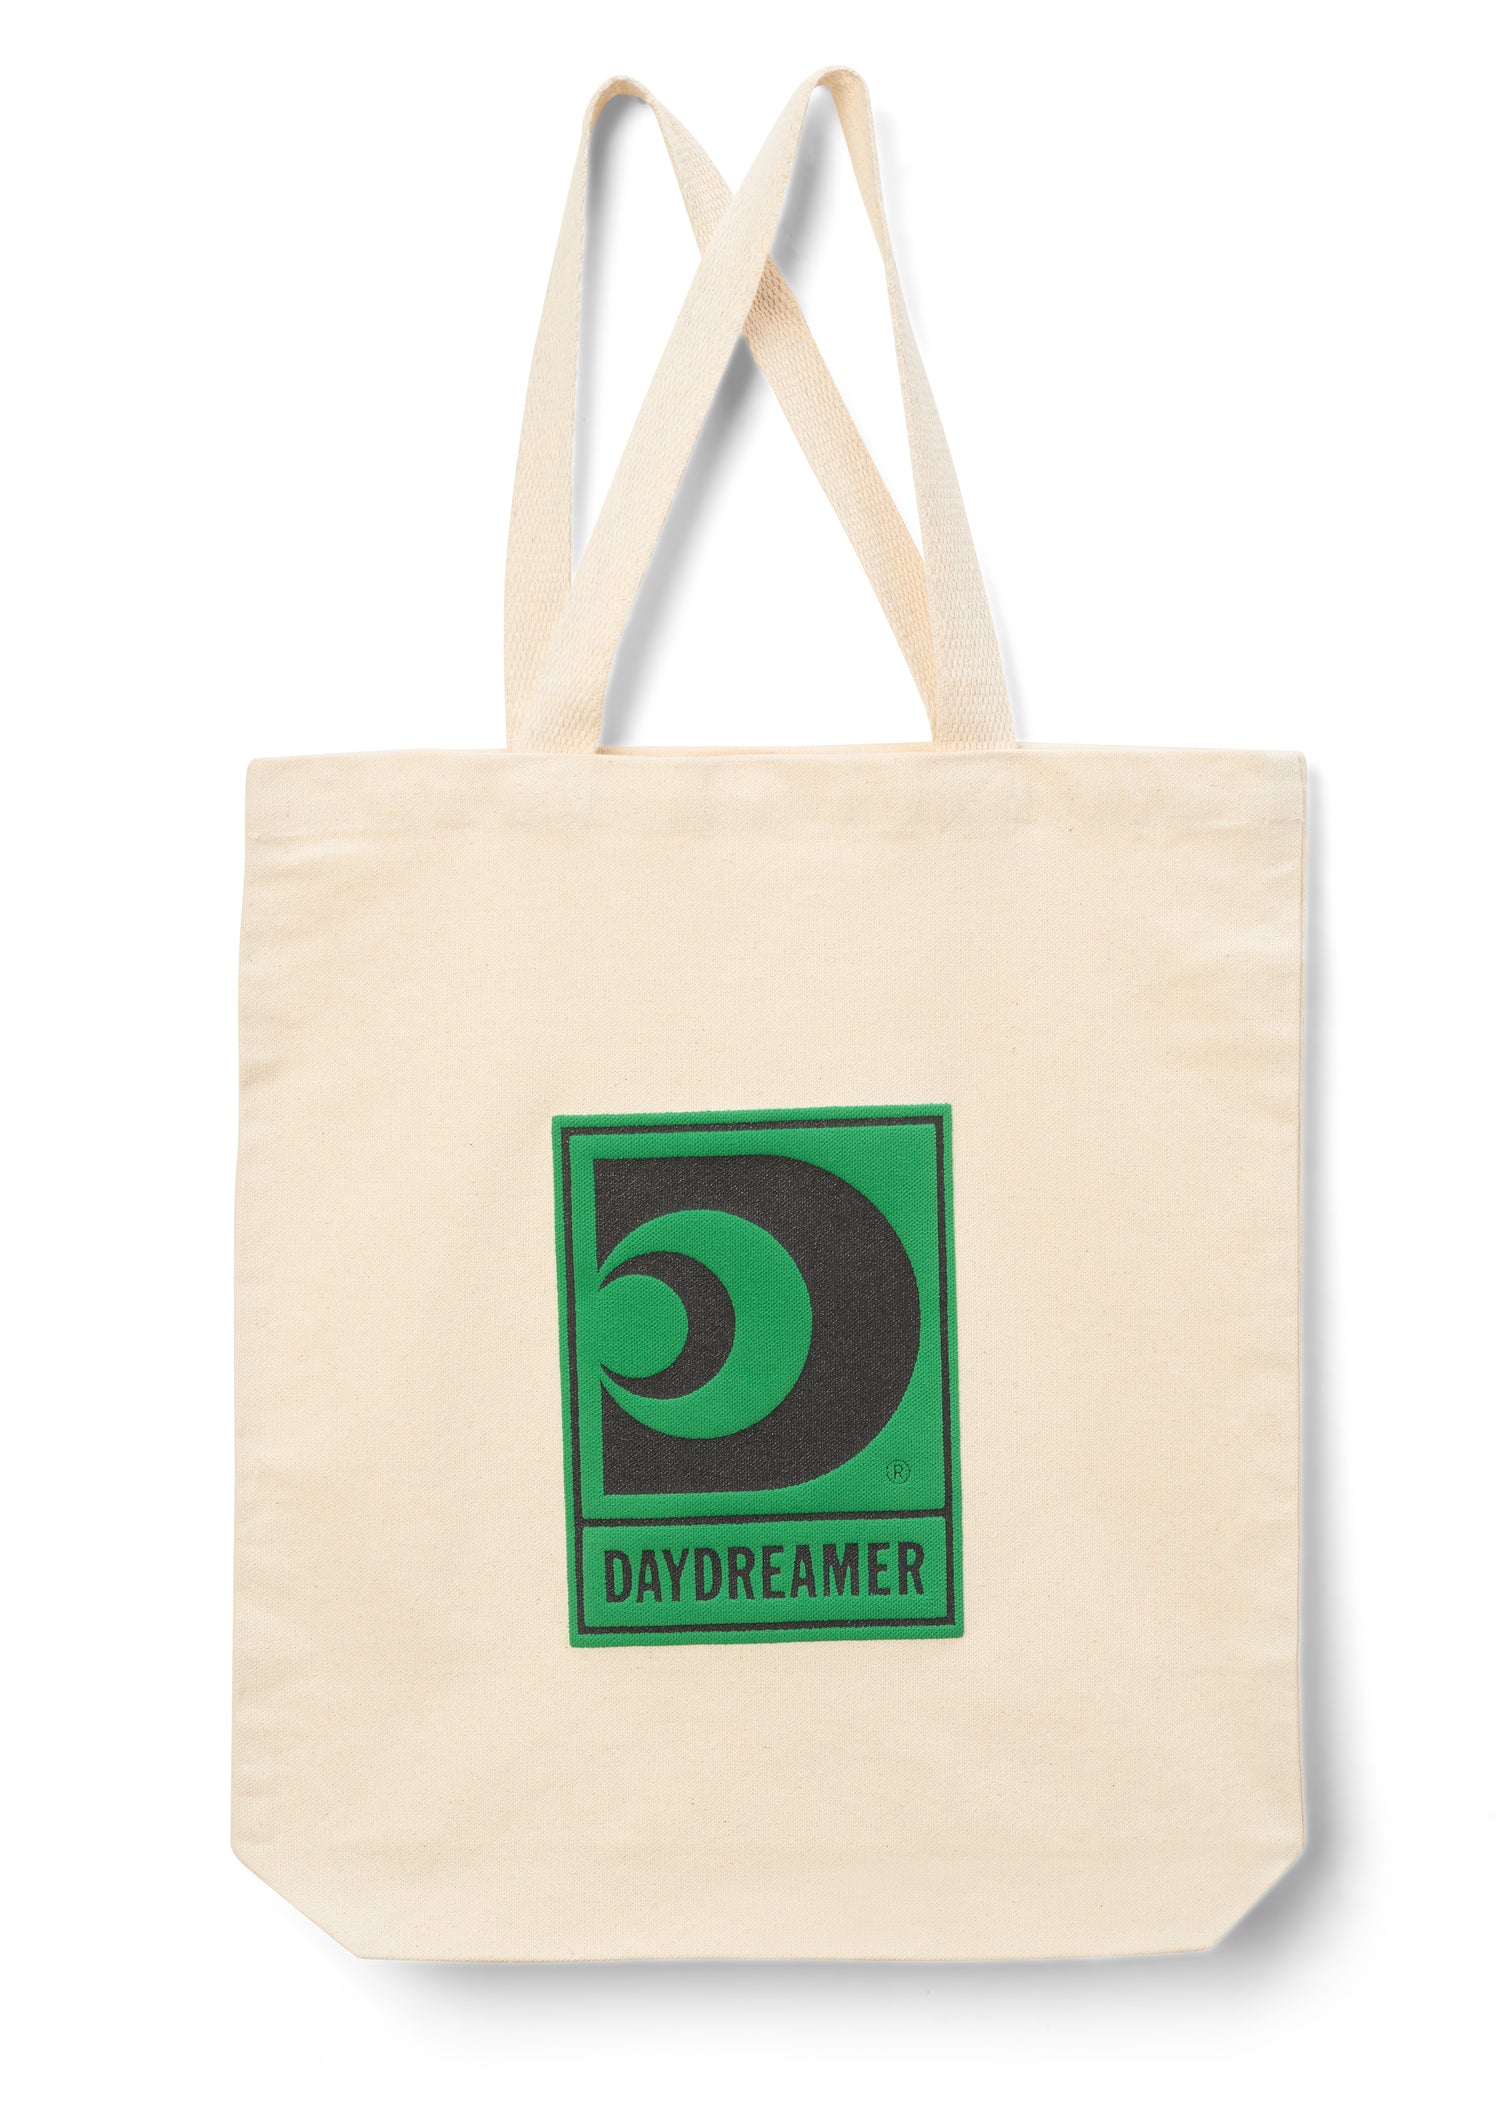 CANVAS TOTE WITH GREEN DAYDREAMER LOGO IN CENTER